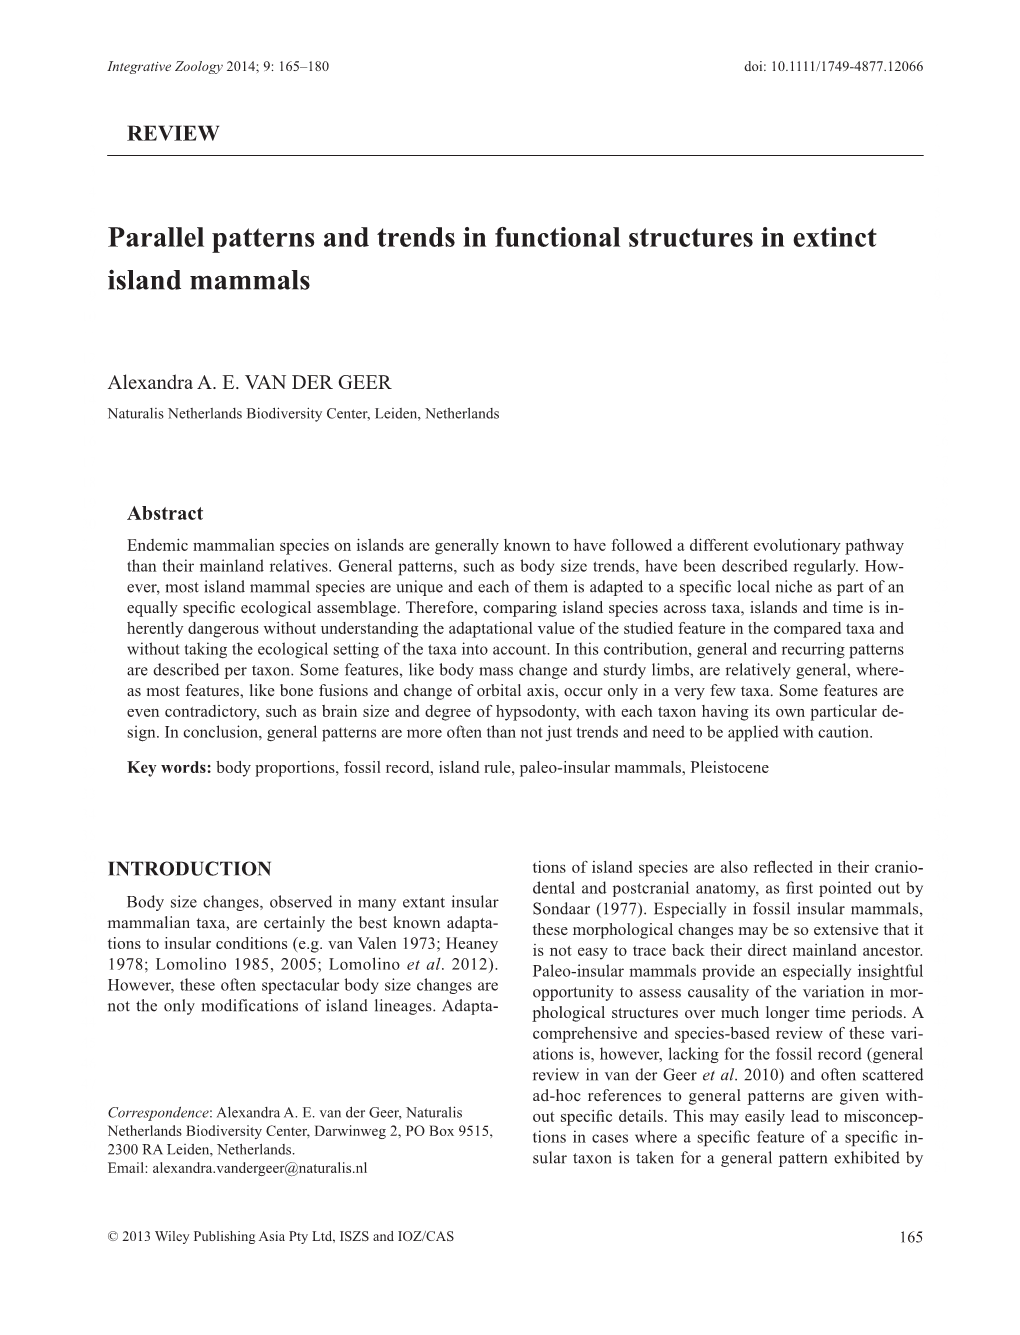 Parallel Patterns and Trends in Functional Structures in Extinct 6 7 7 8 8 9 Island Mammals 9 10 10 11 11 12 12 13 Alexandra A